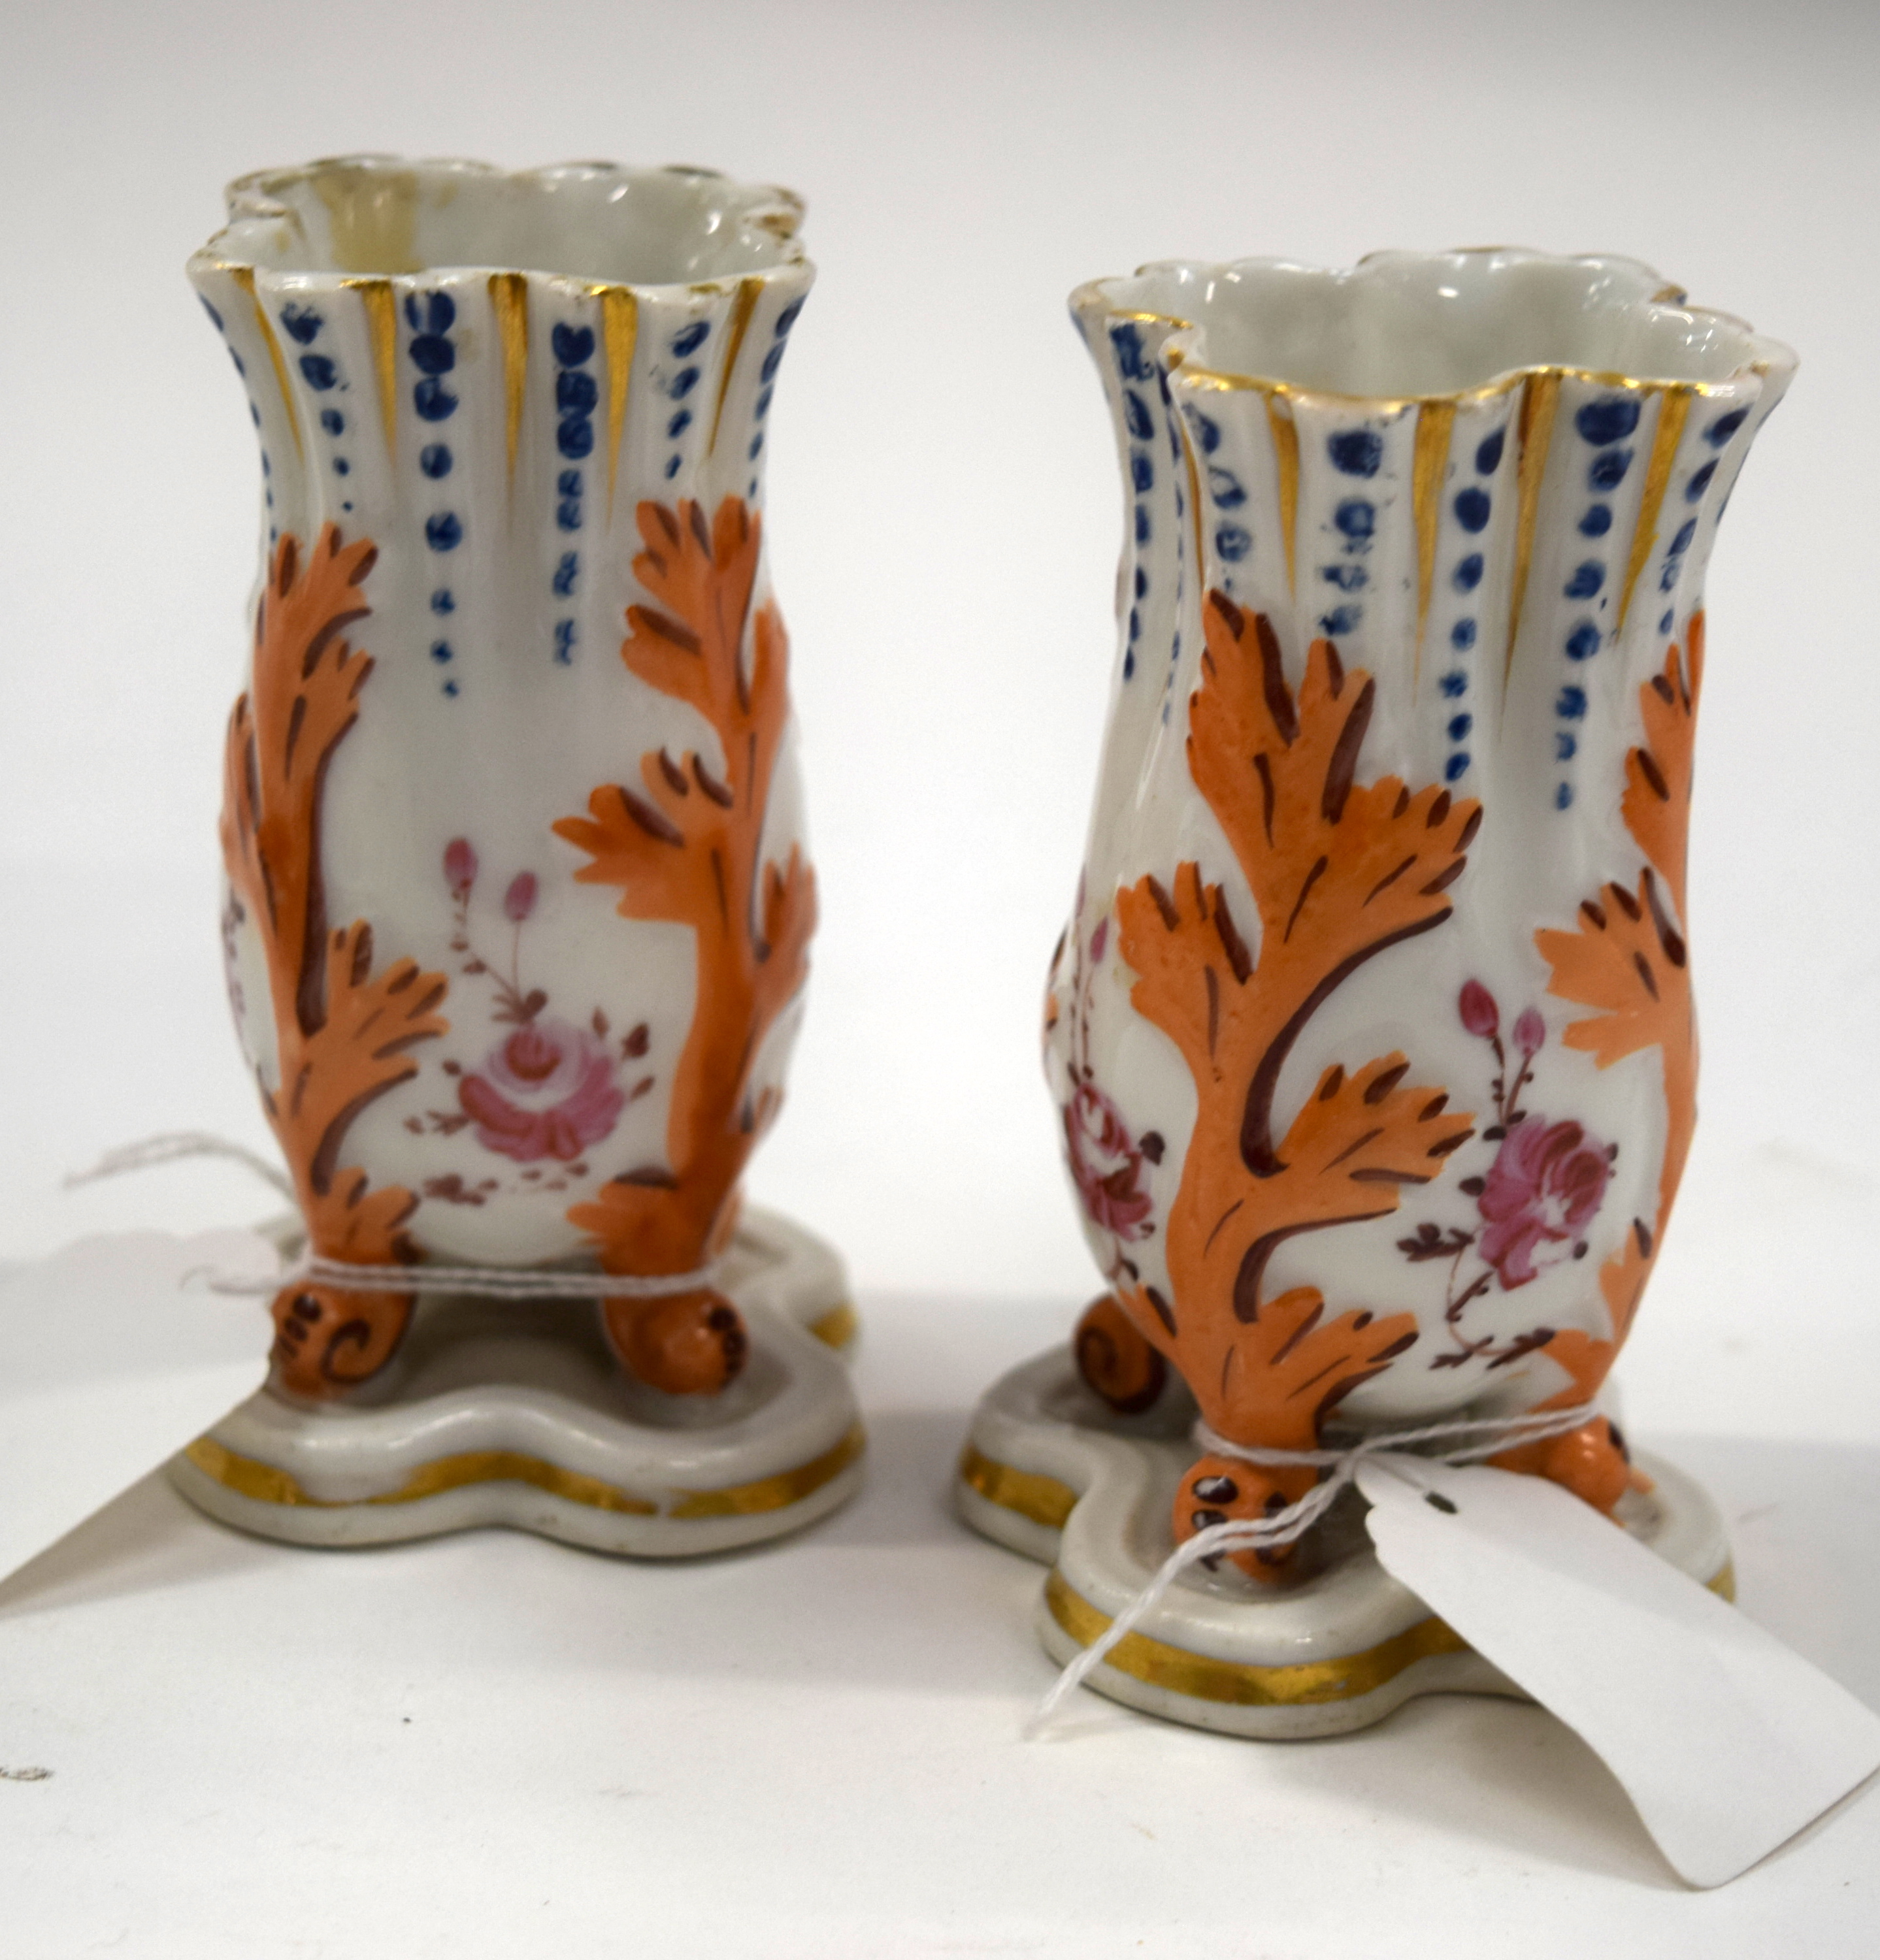 A PAIR OF ANTIQUE FRENCH PORCELAIN SPILL VASES. 12.5 cm high.